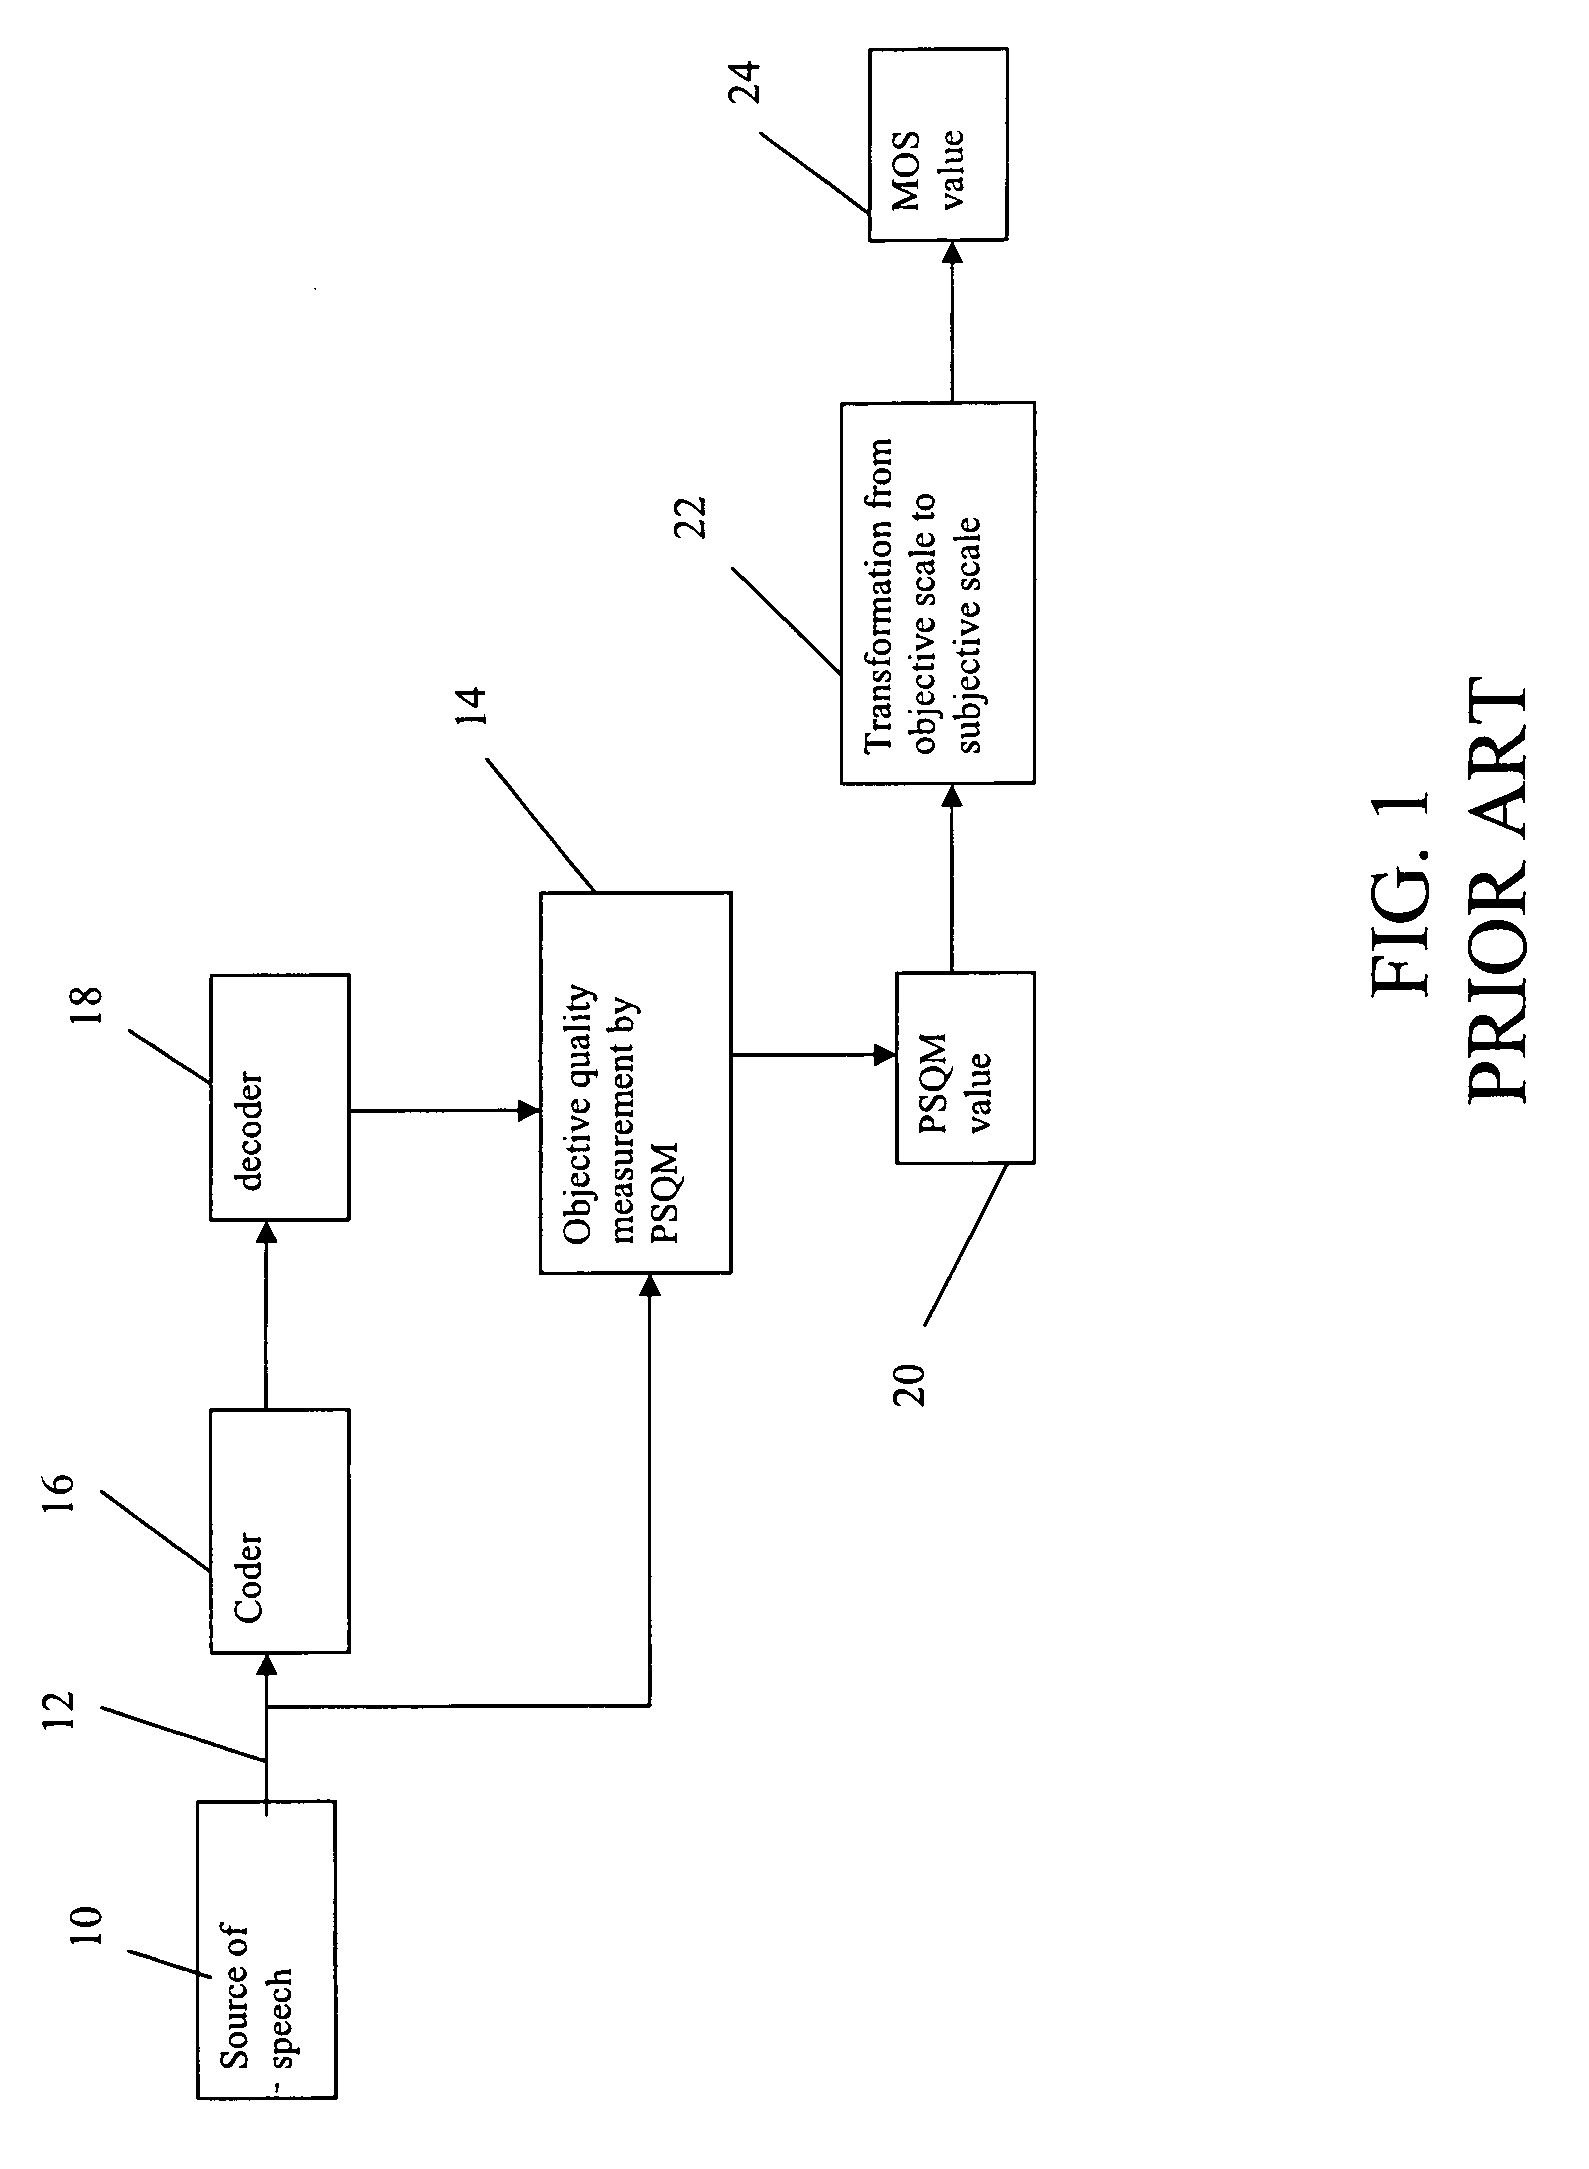 Passive system and method for measuring the subjective quality of real-time media streams in a packet-switching network